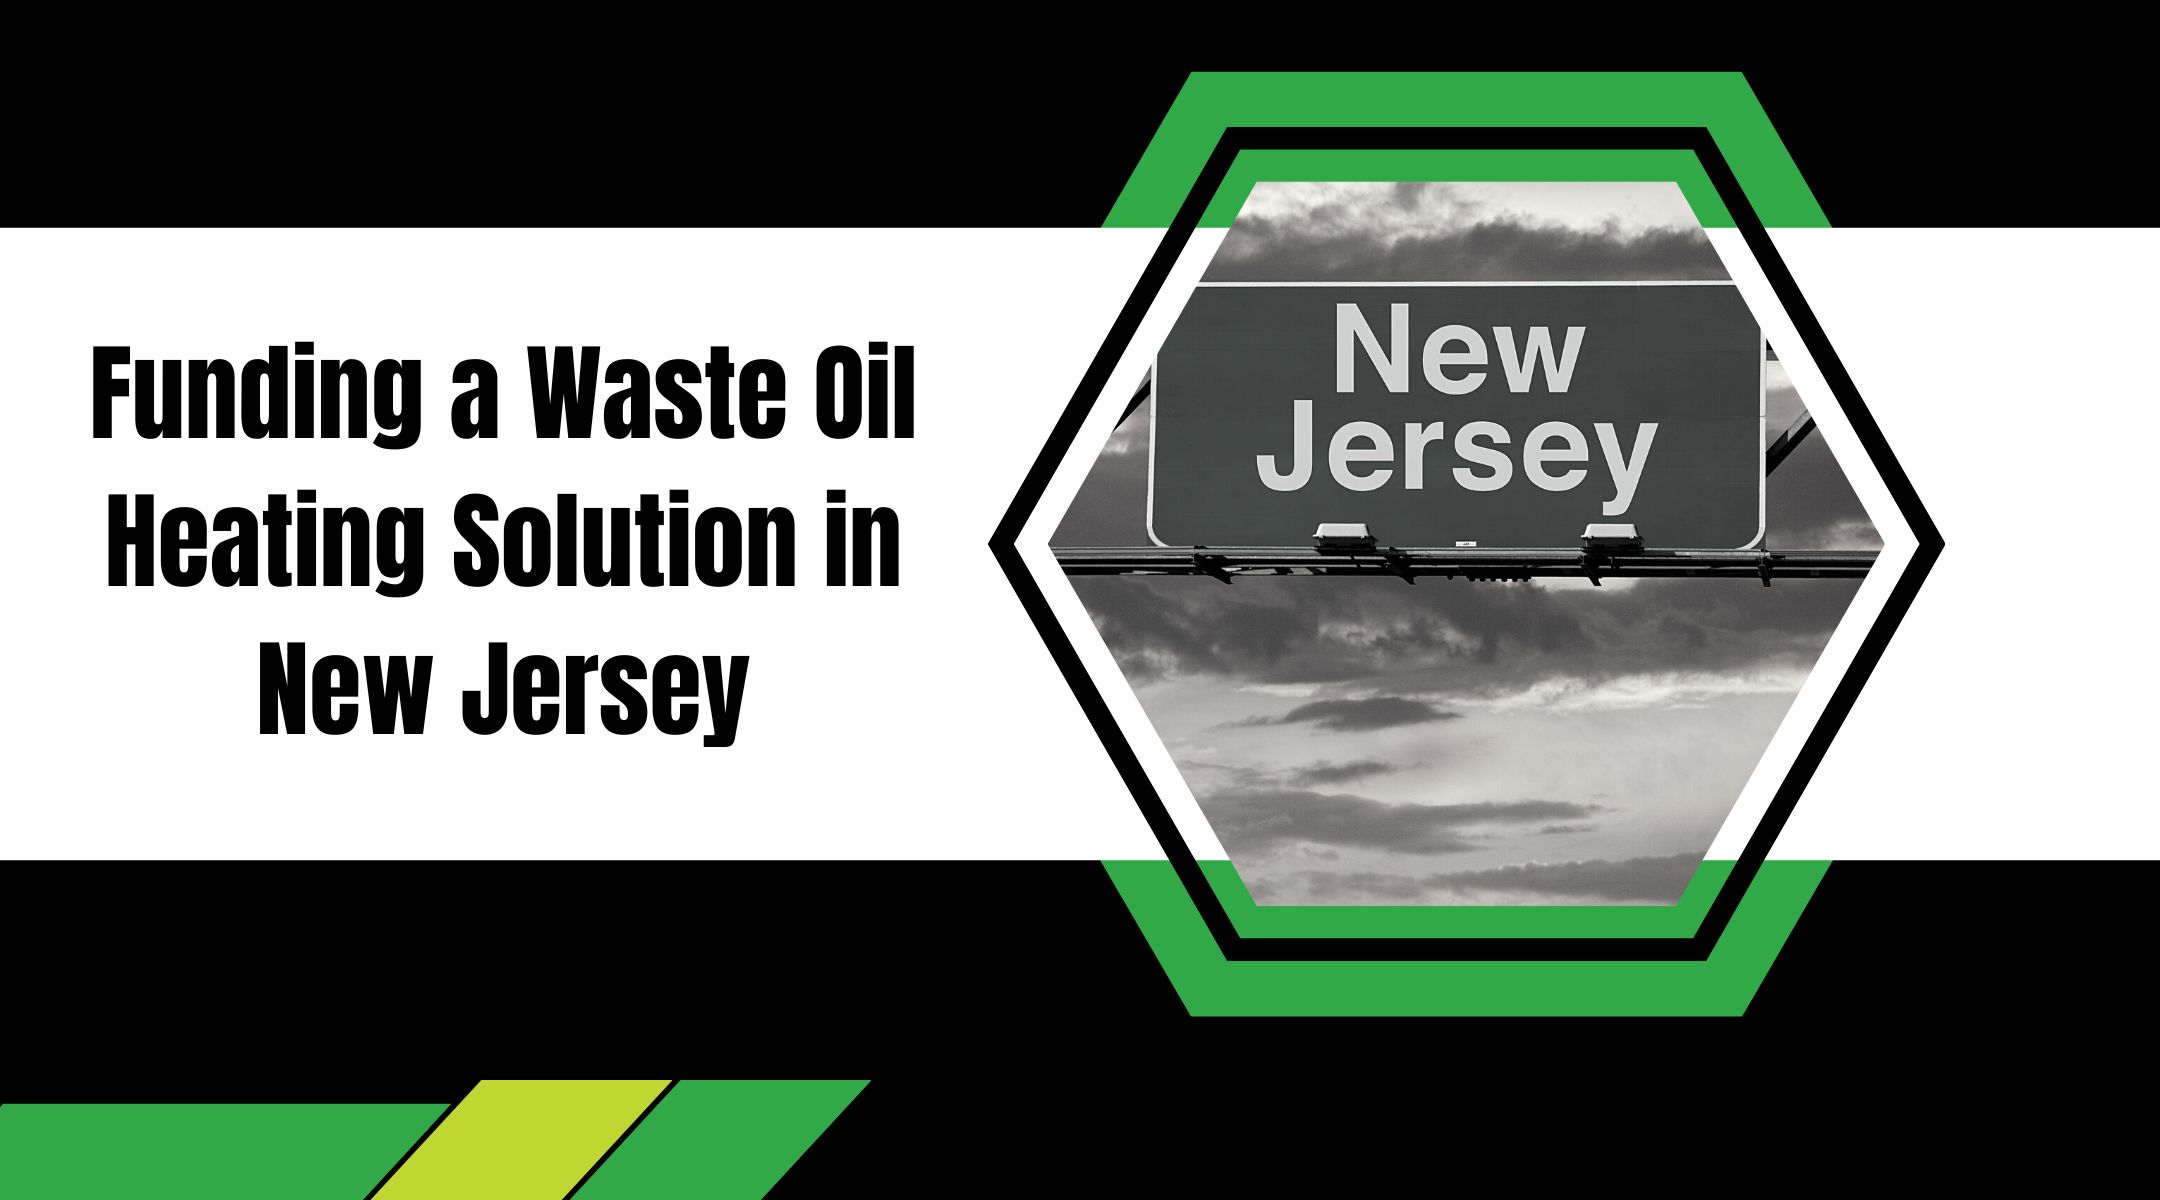 Funding a Waste Oil Heating Solution in New Jersey